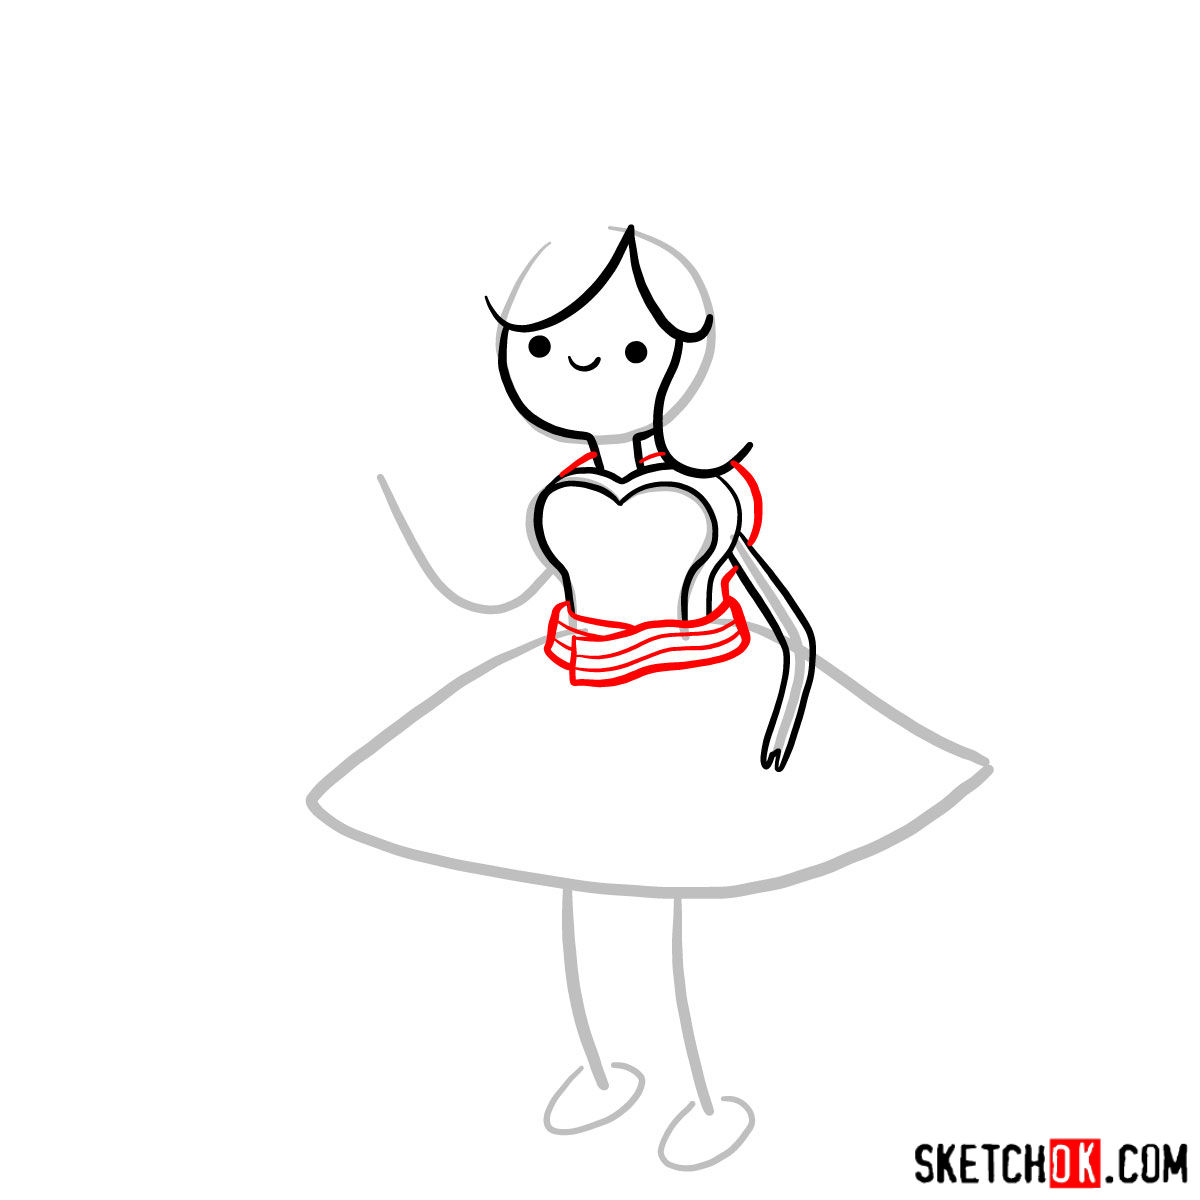 How to draw Breakfast Princess from Adventure Time - step 06